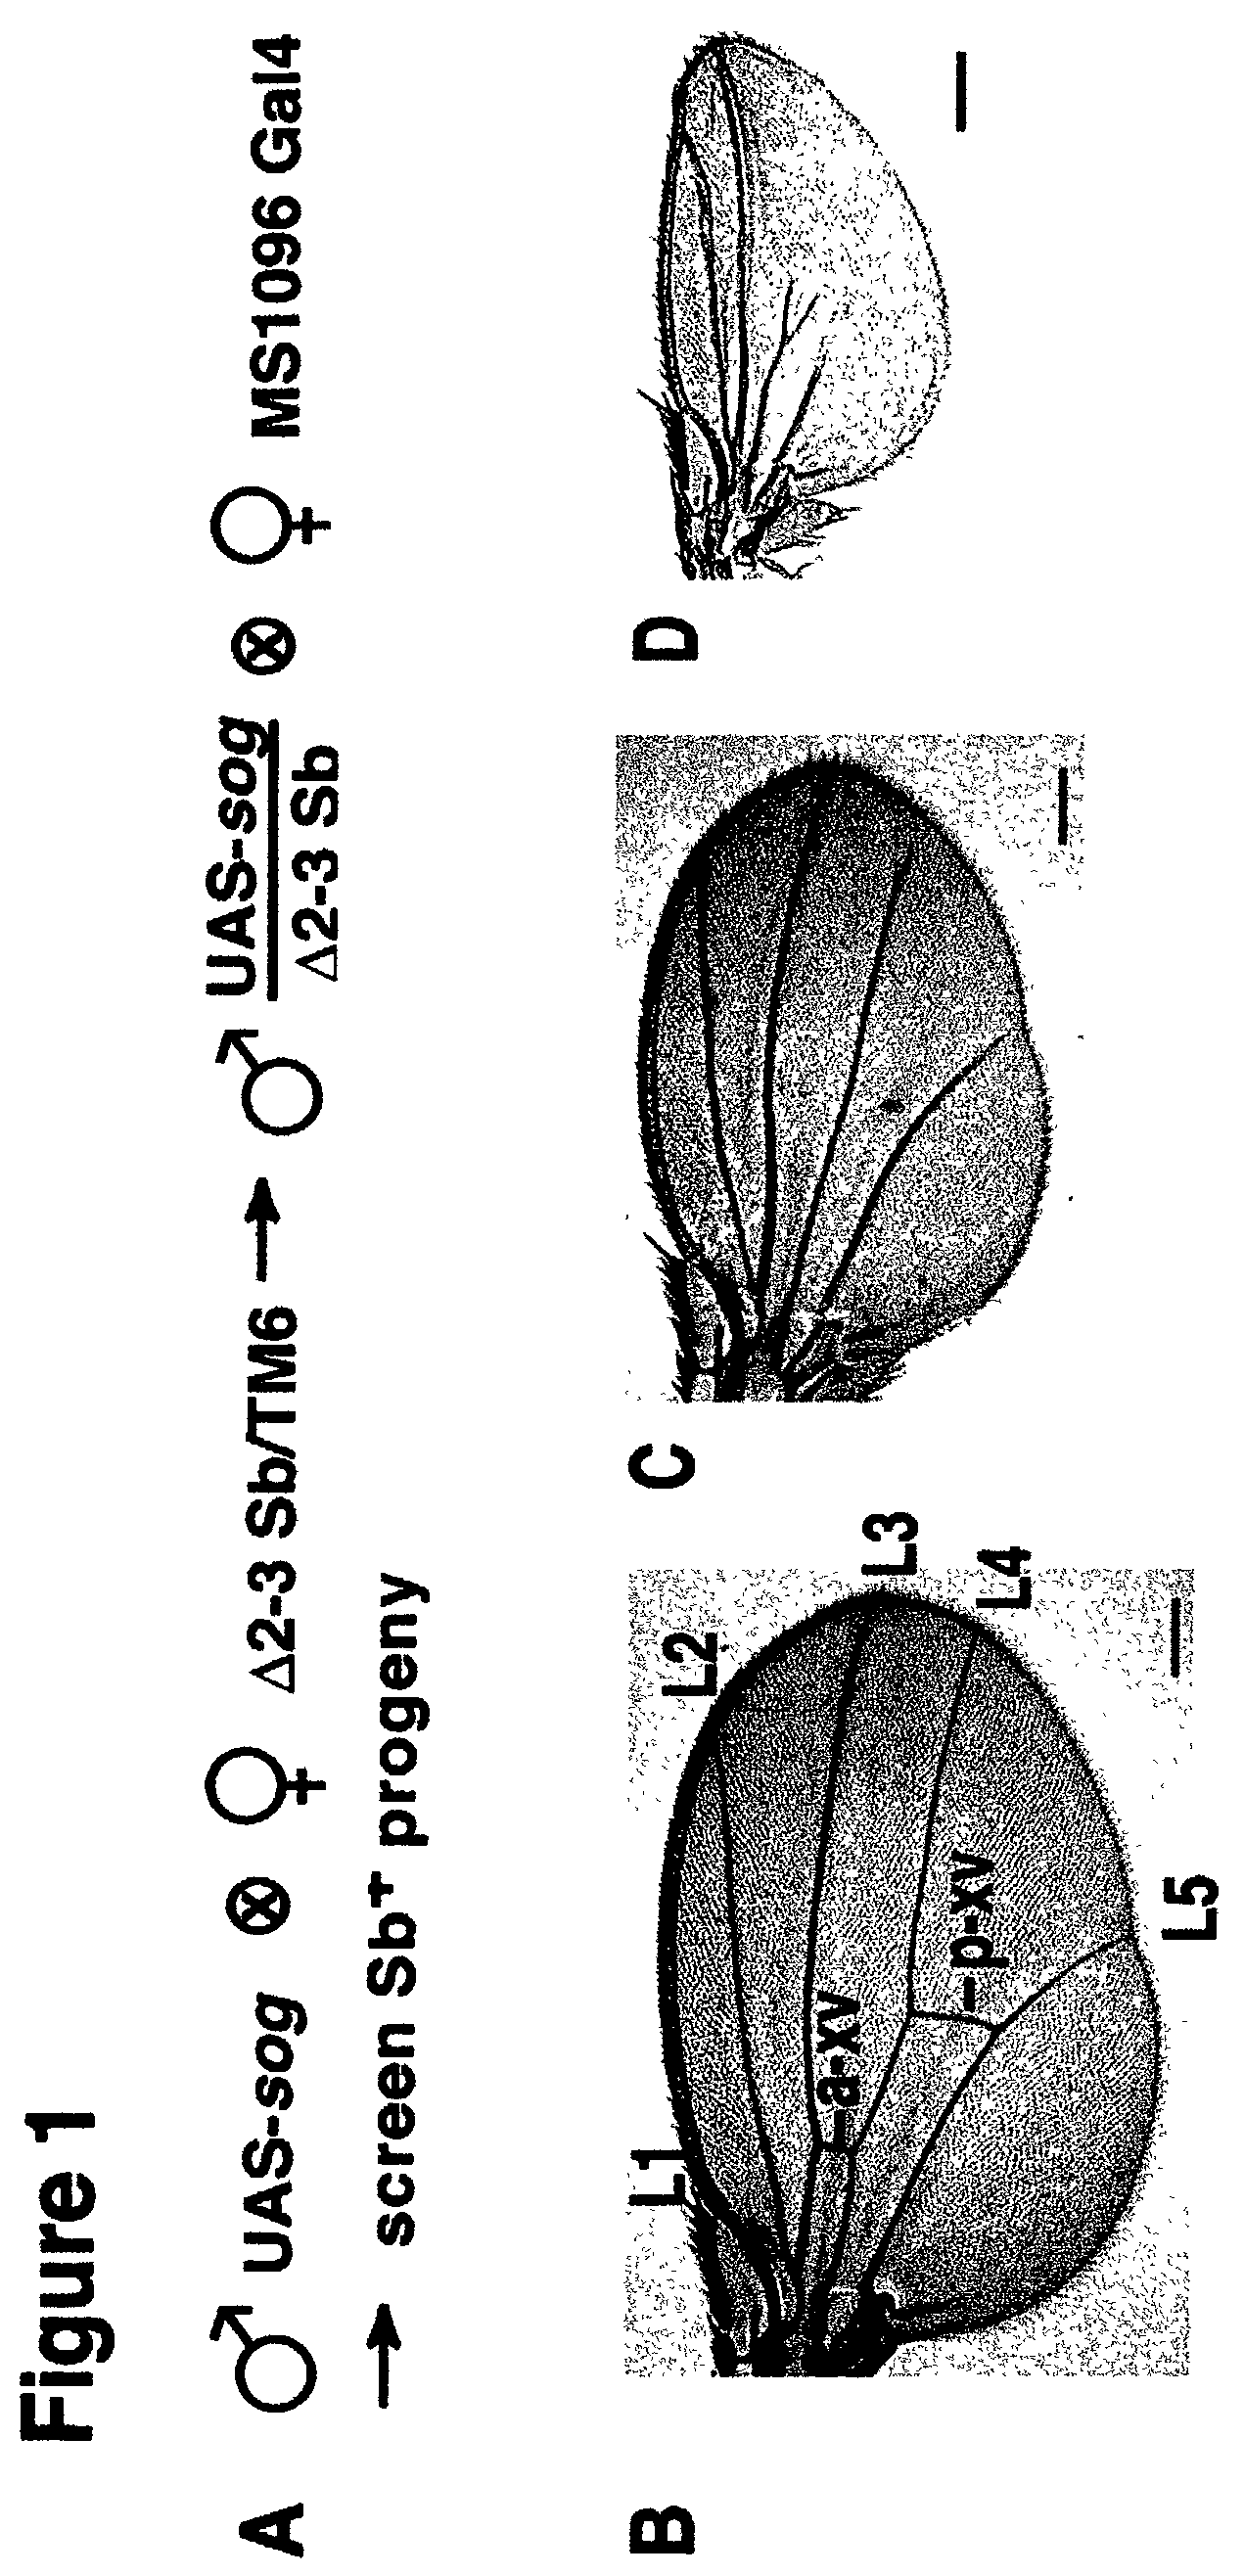 Method for generating overexpression of alleles in genes of unknown function